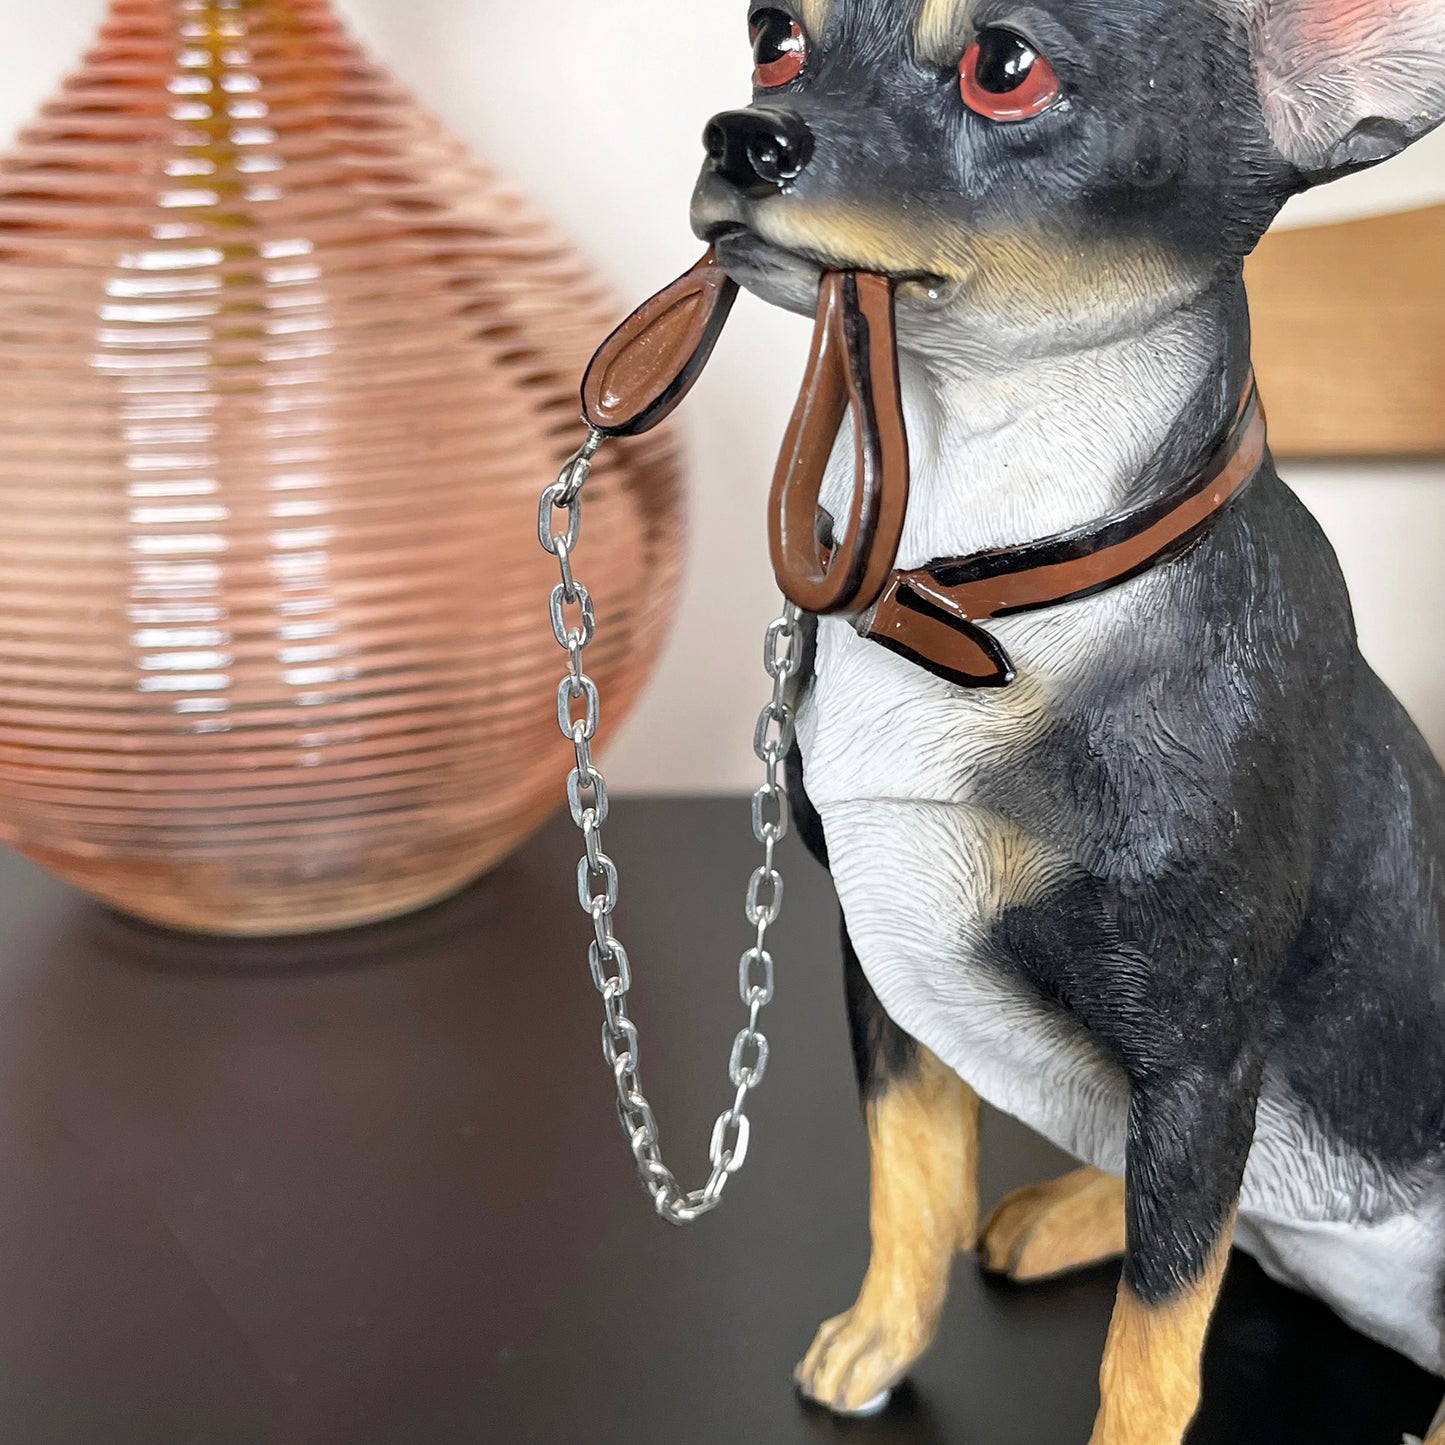 Chihuahua Dog With Lead Ornament